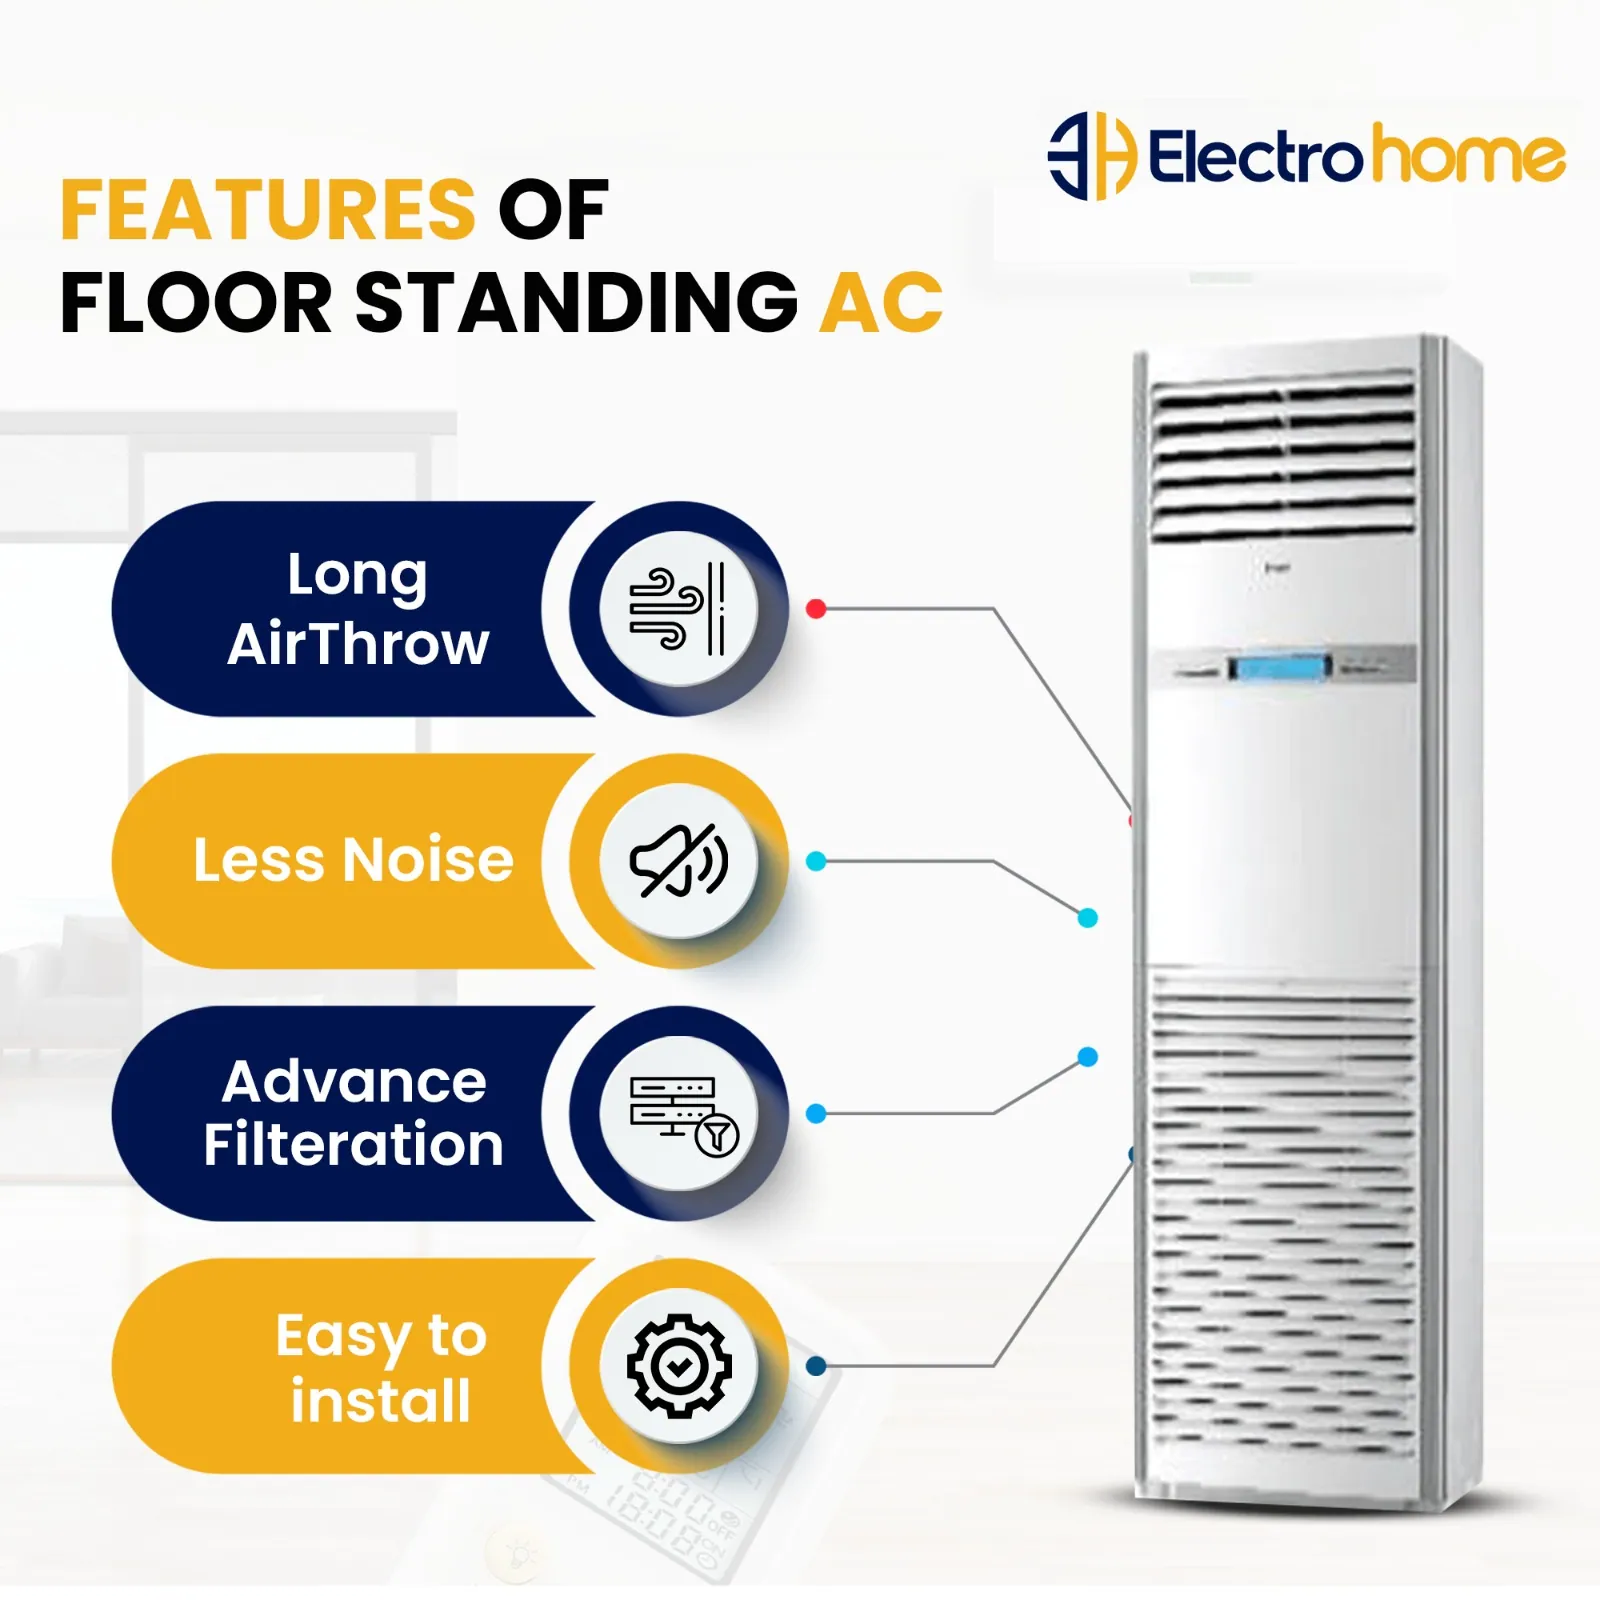 latest features of floor standing ACs